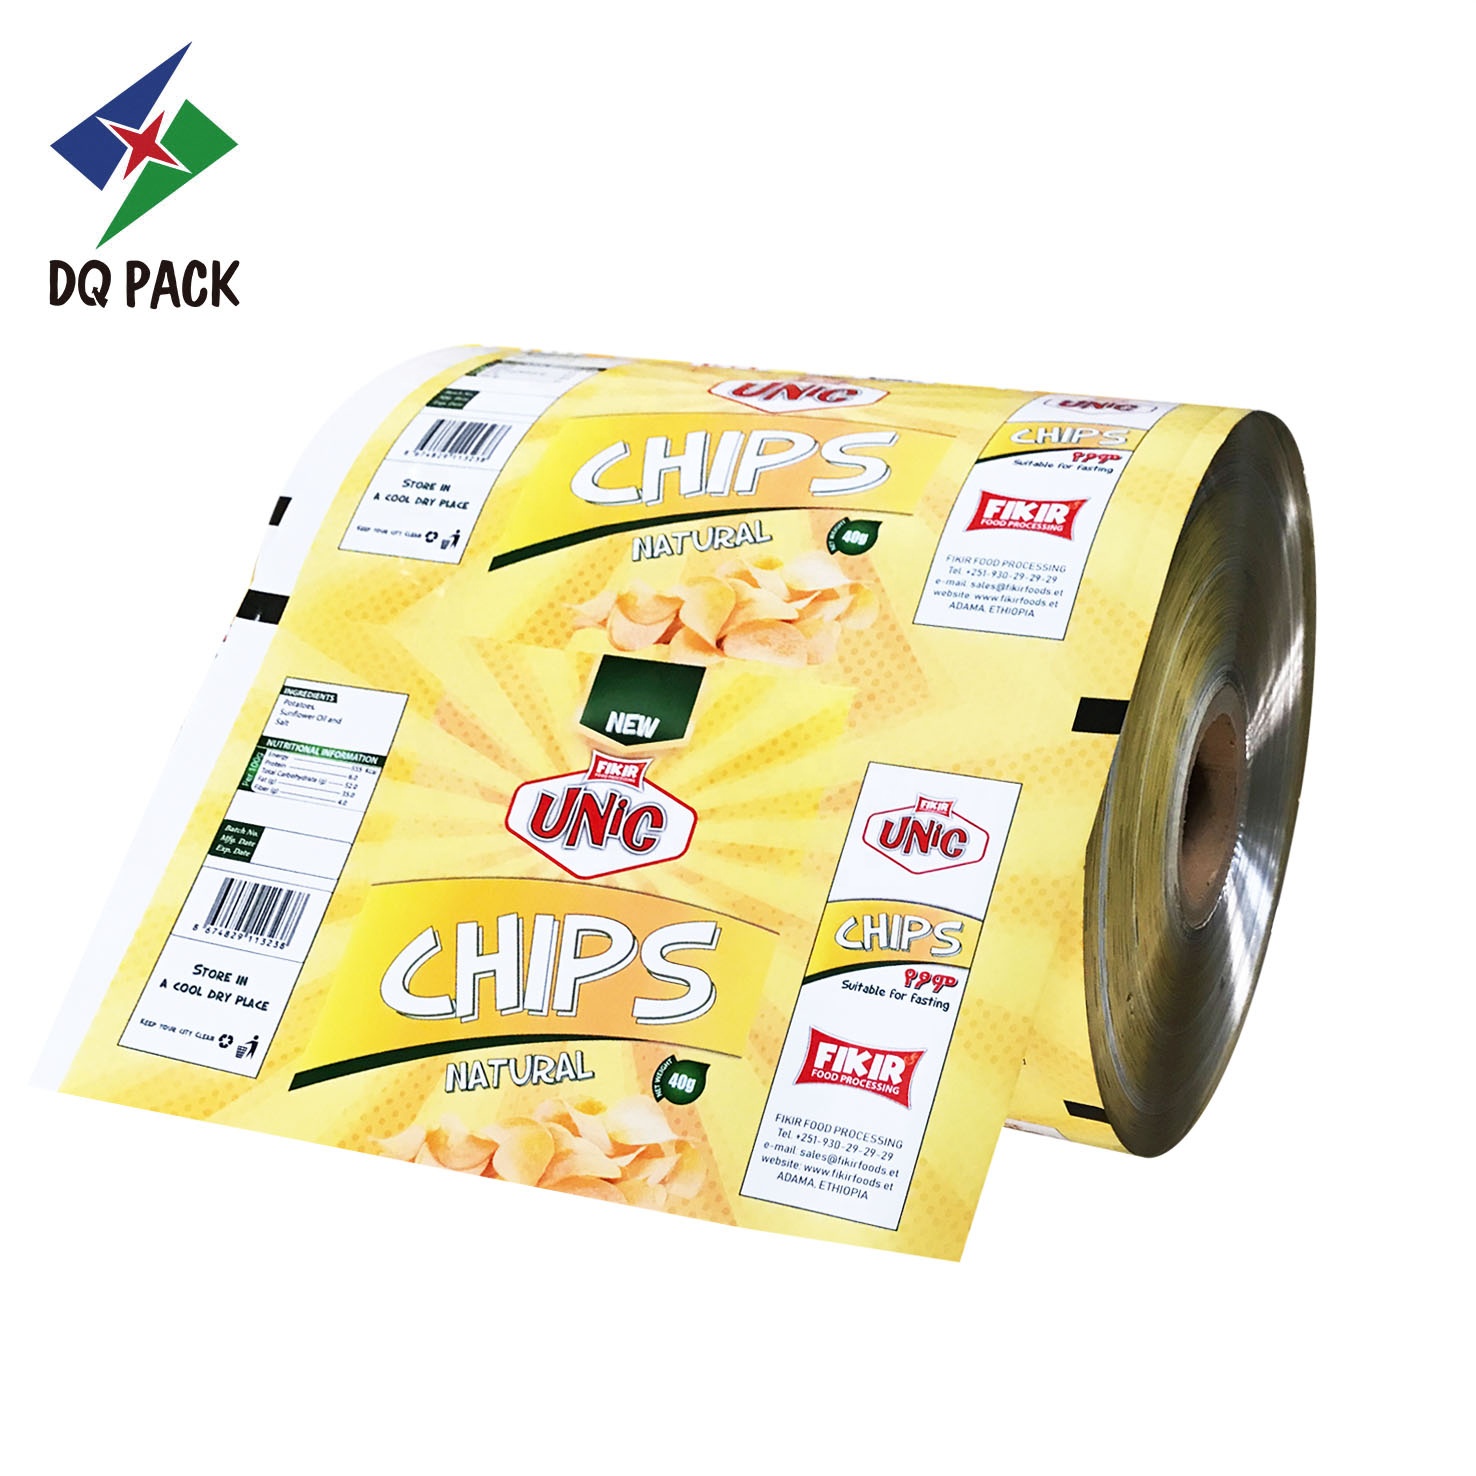 DQ PACK Hot Sale Printed Laminated Metalized Potato Chips Packaging Film